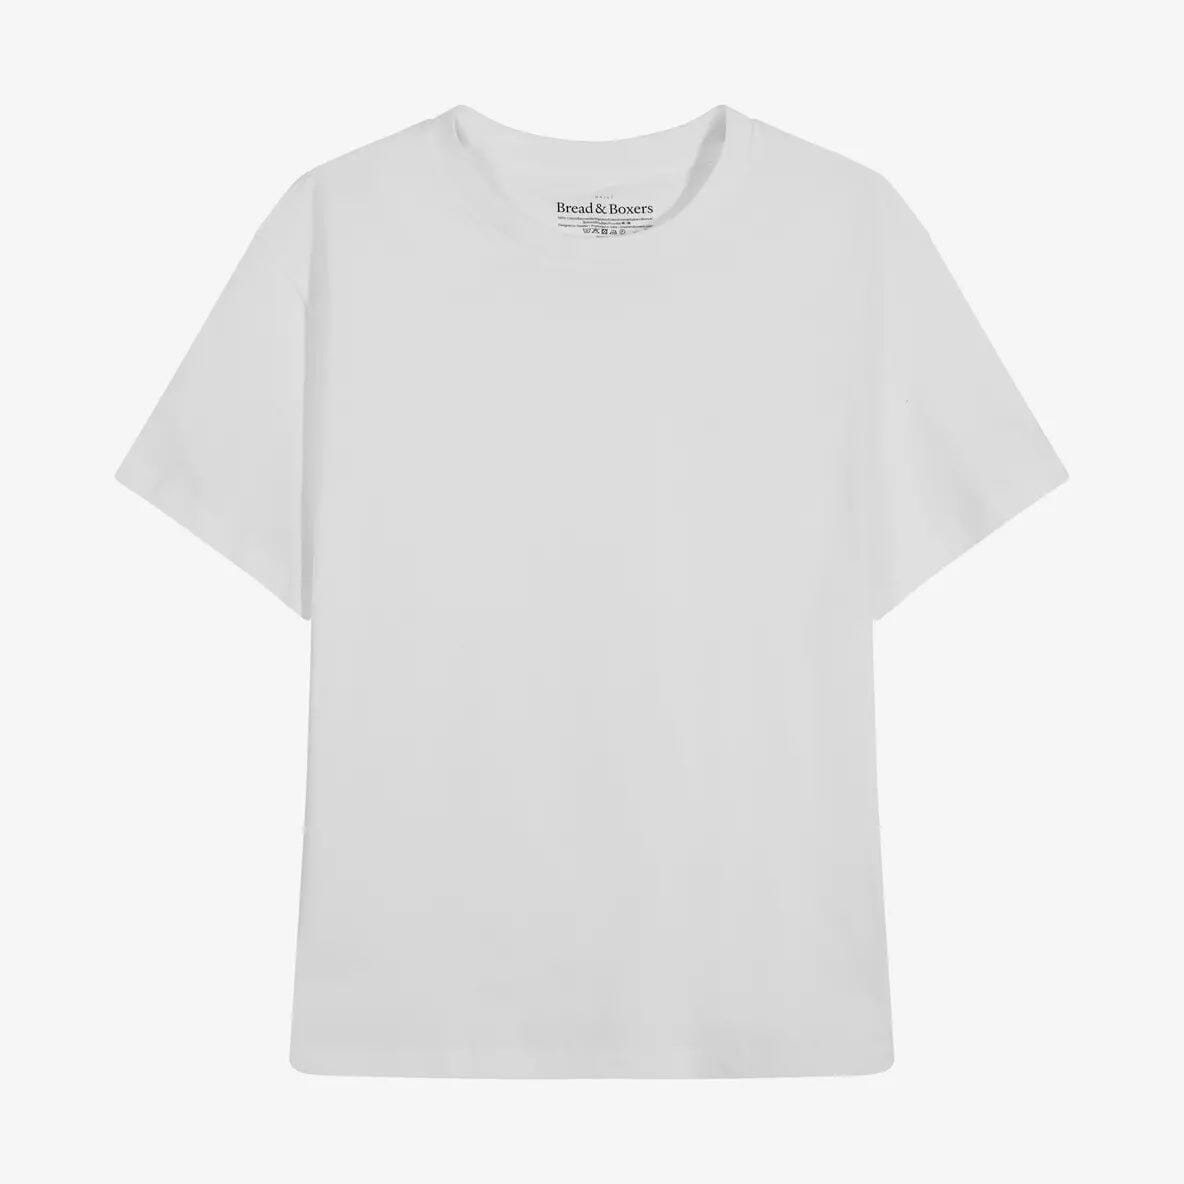 Bread and Boxers Crew-Neck Regular White T-shirt